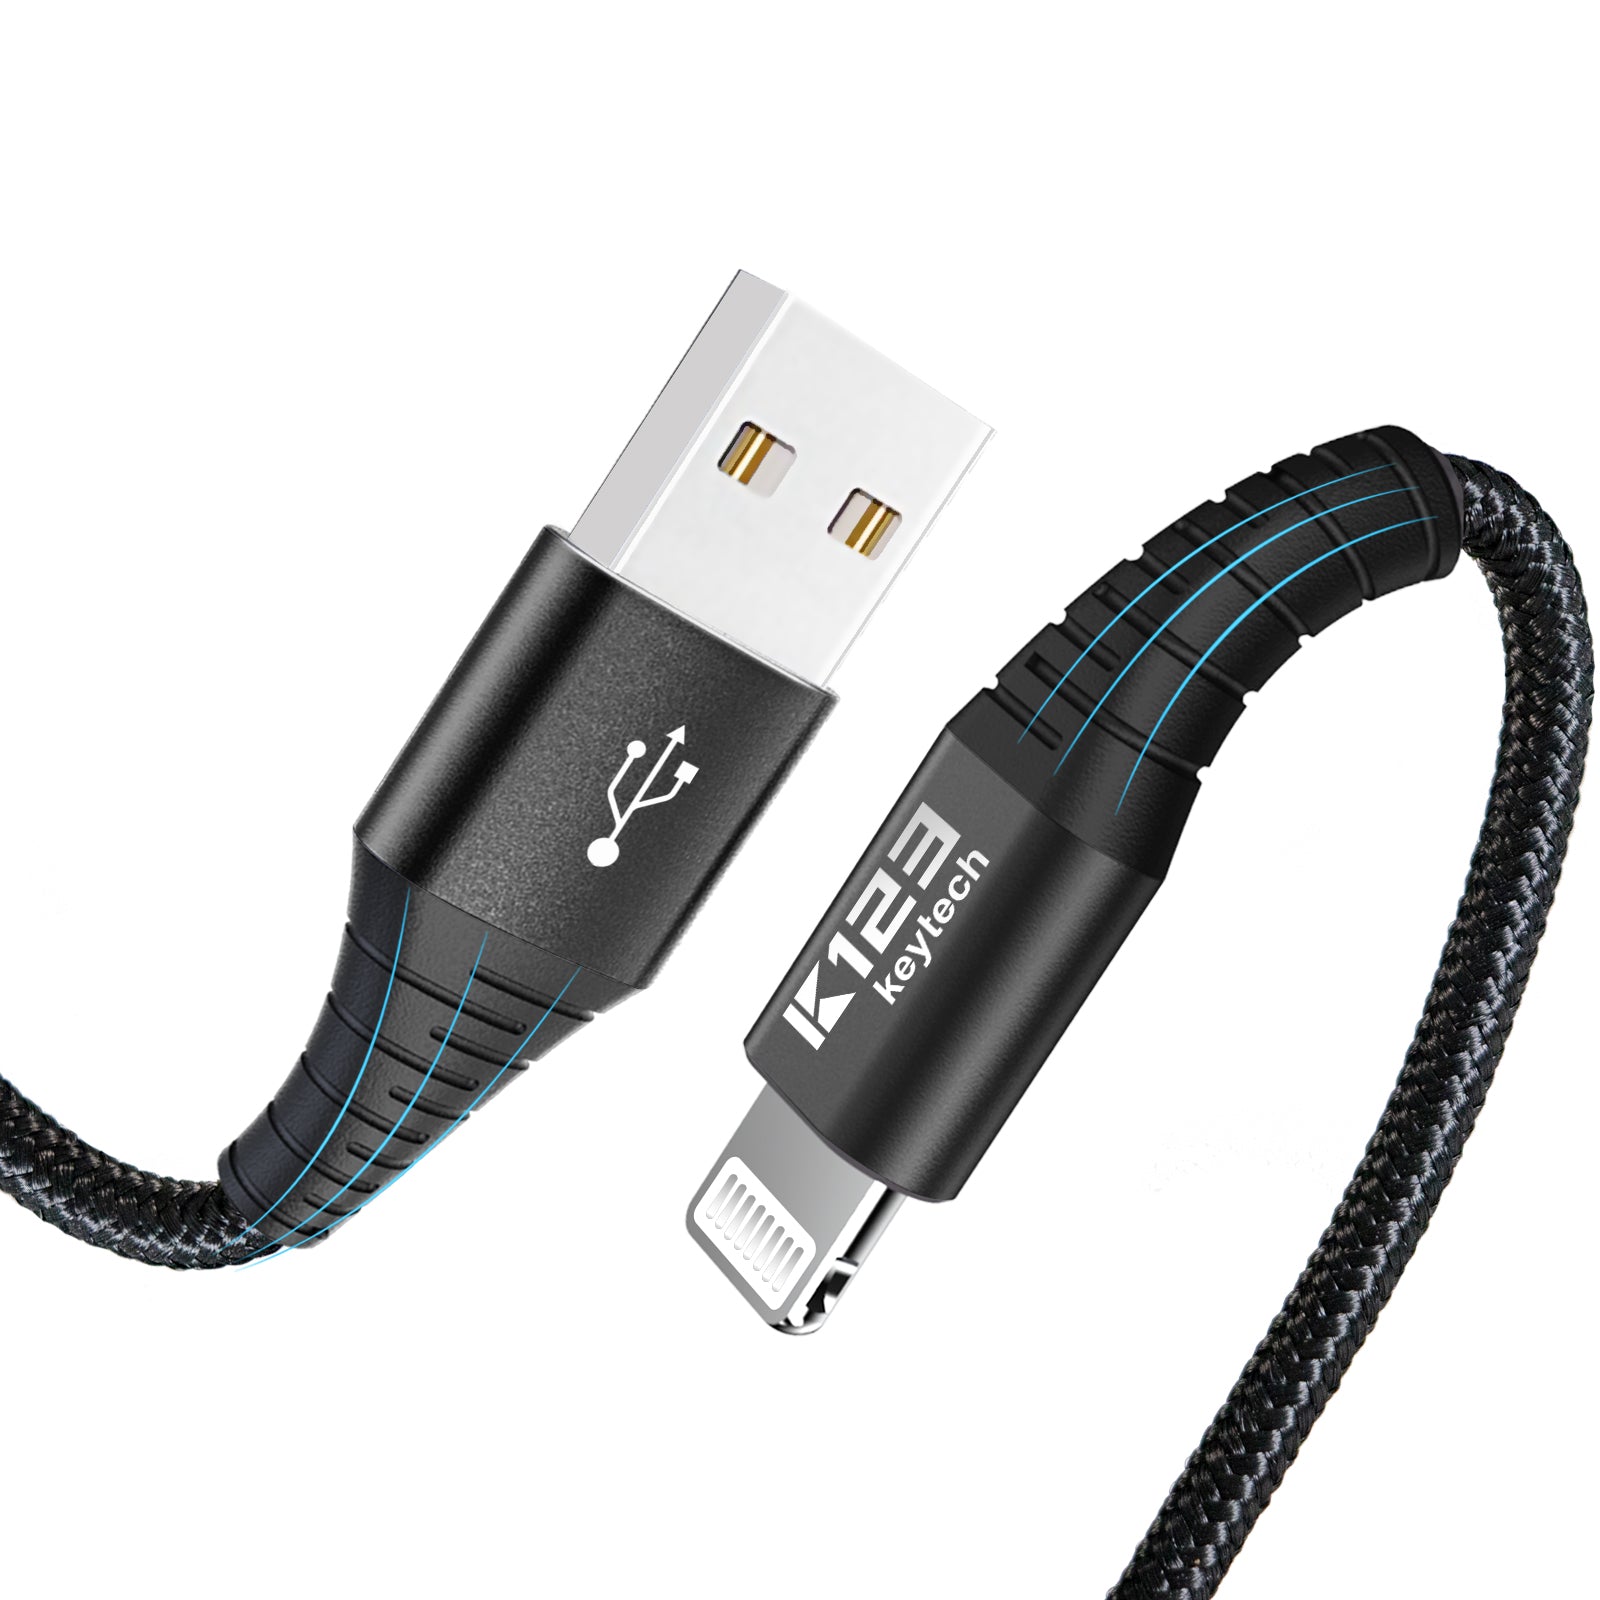 USB A to Lightning Charging Cable - 2 Meter MFi Certified